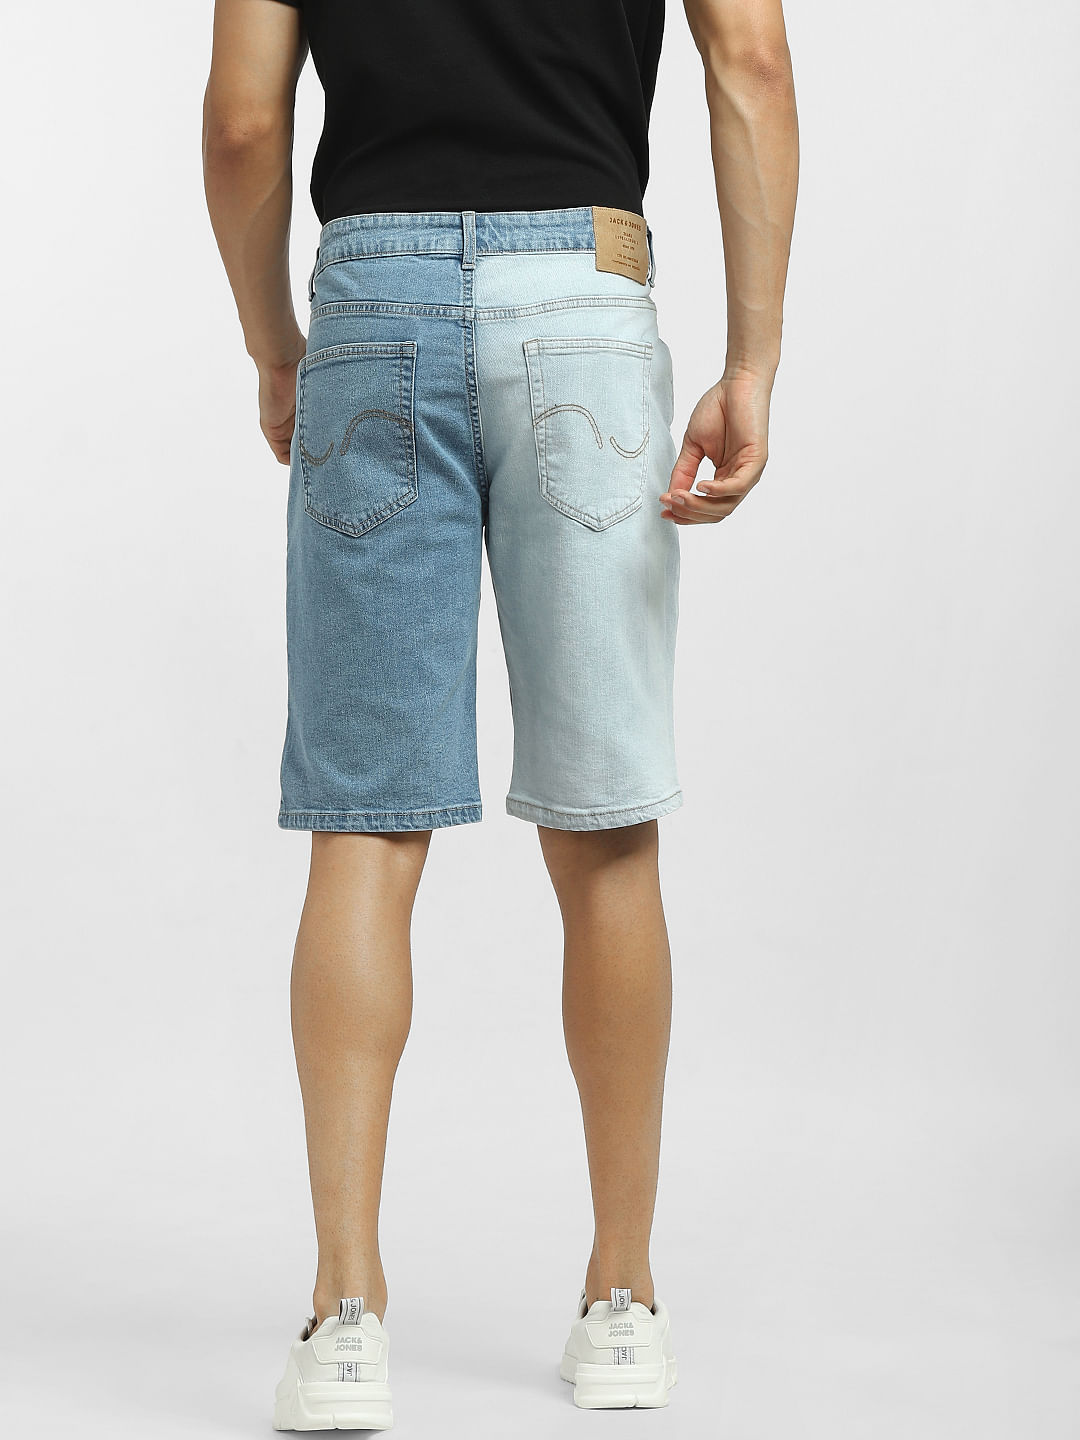 Shorts | Categories | Clothing | Ombre.com - Men's clothing online